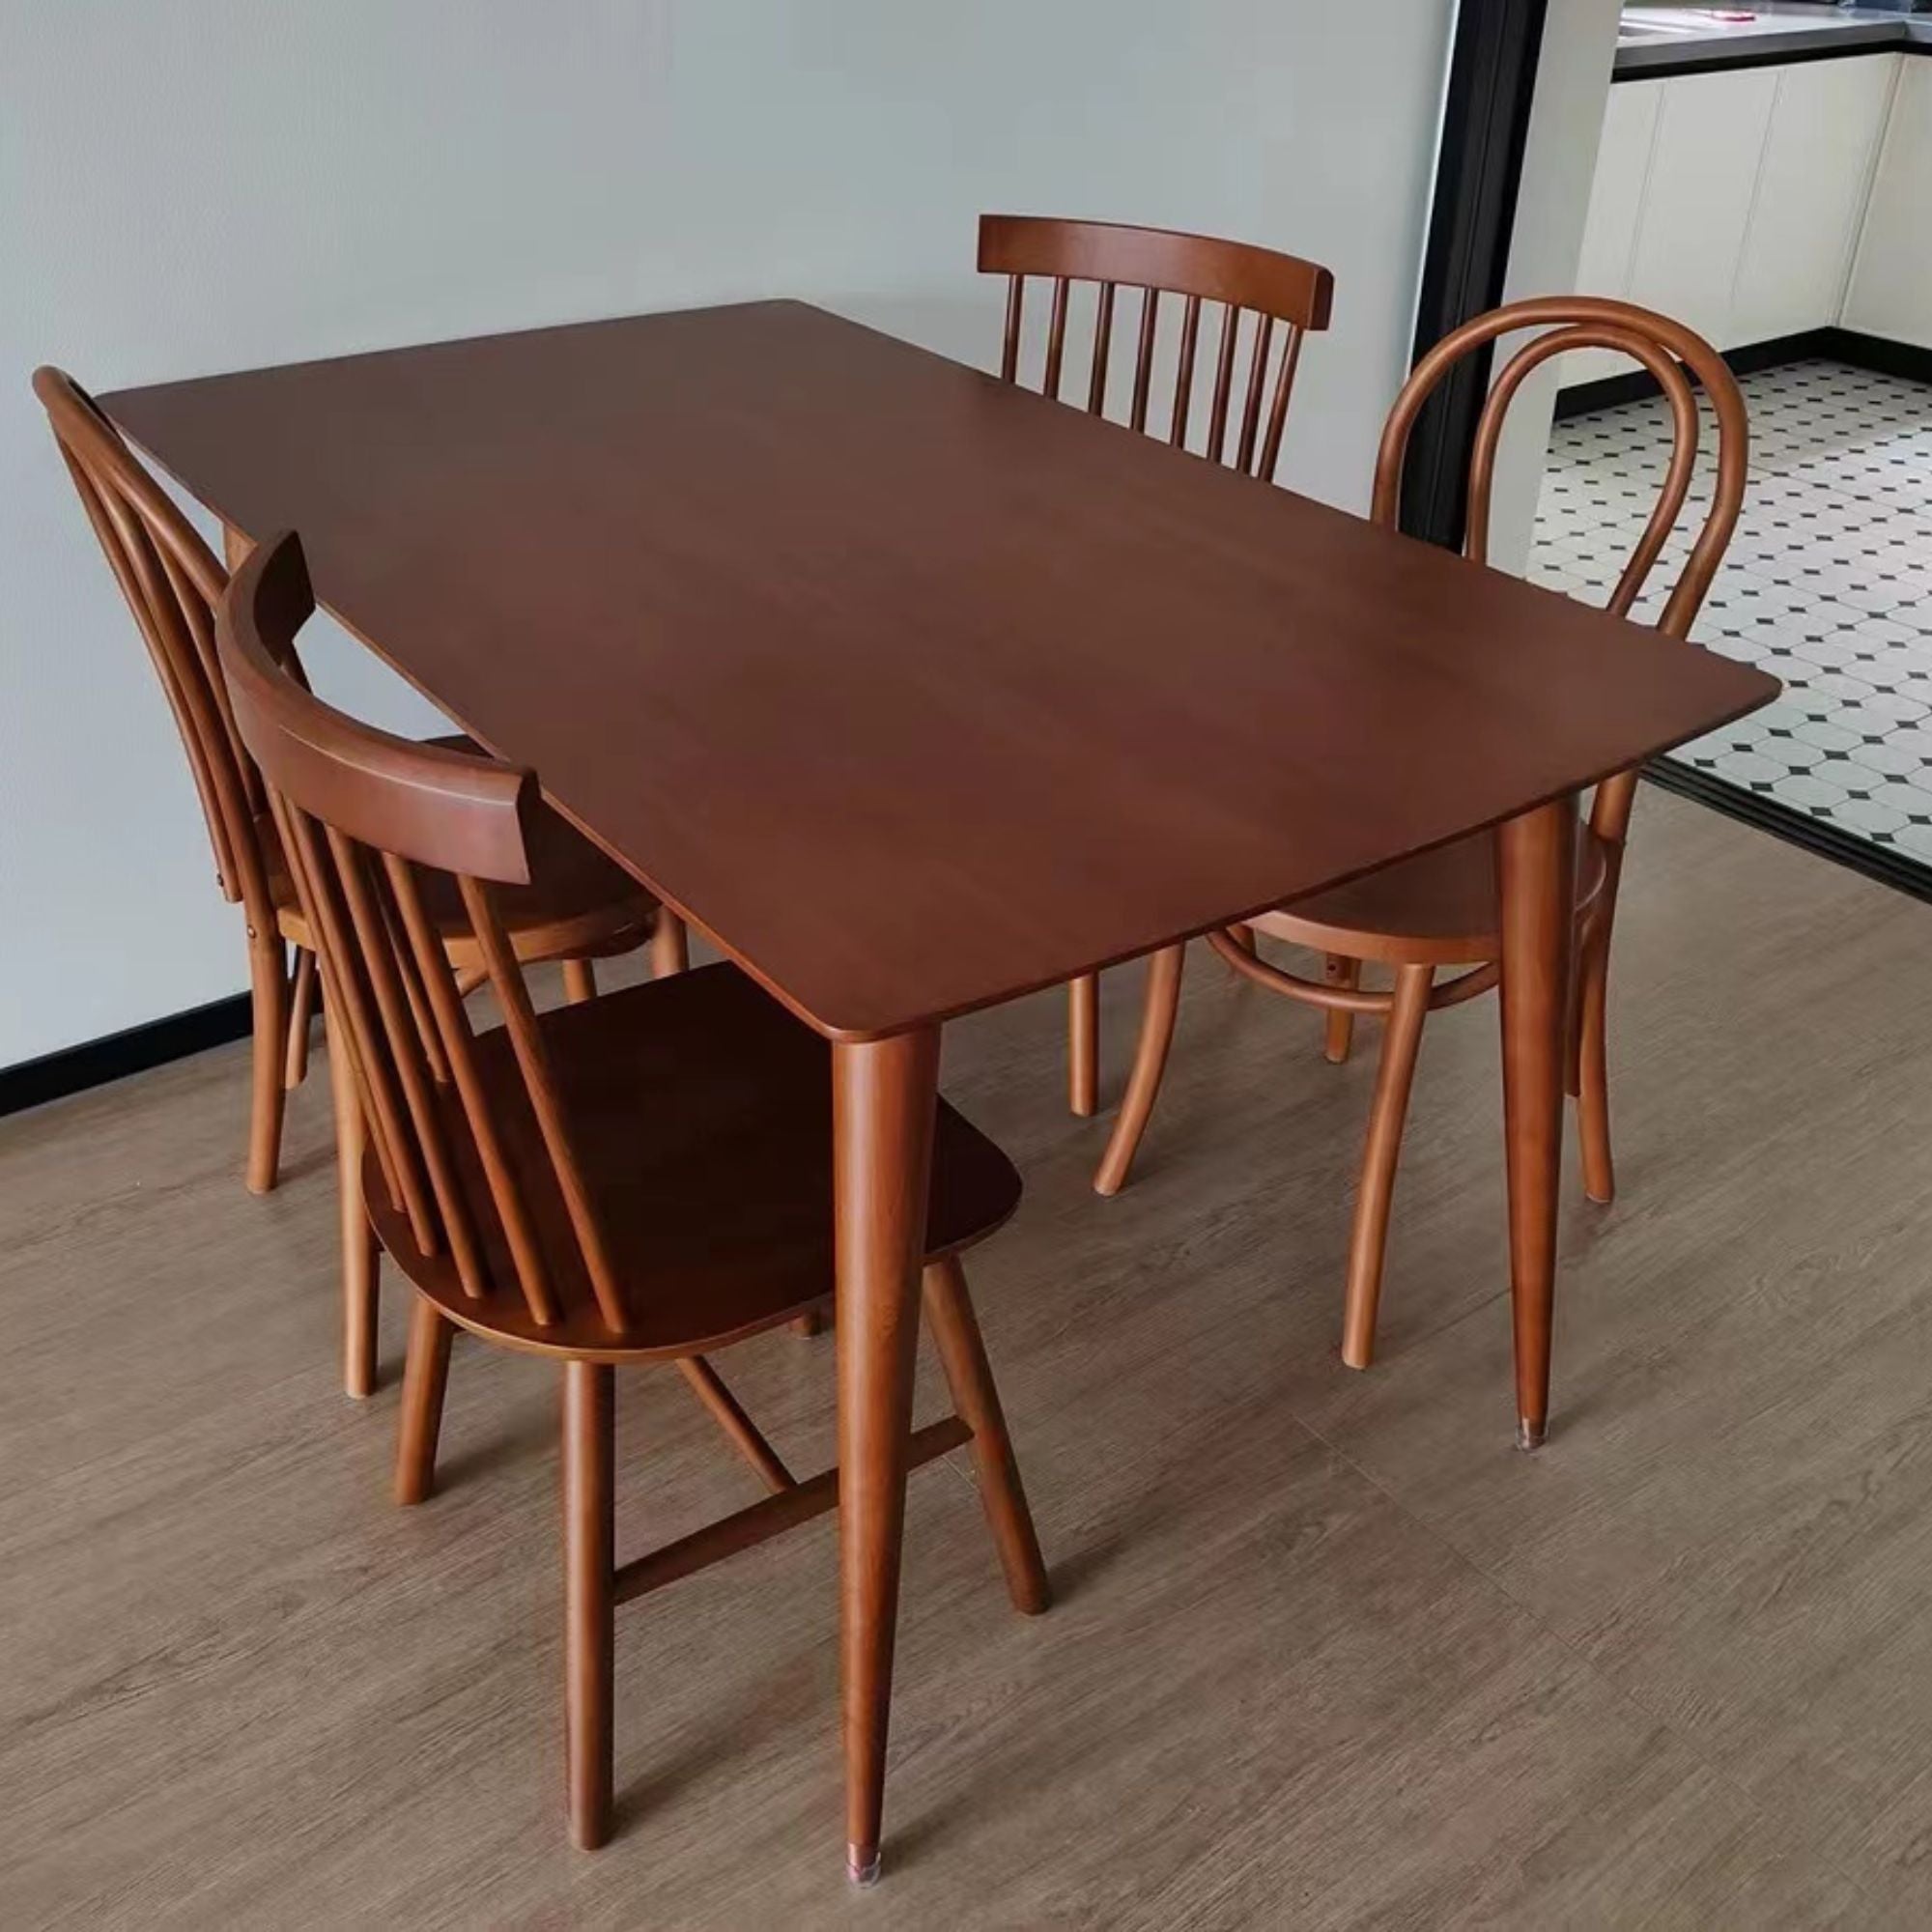 Toby poplar wood dining chair as part of dining table set